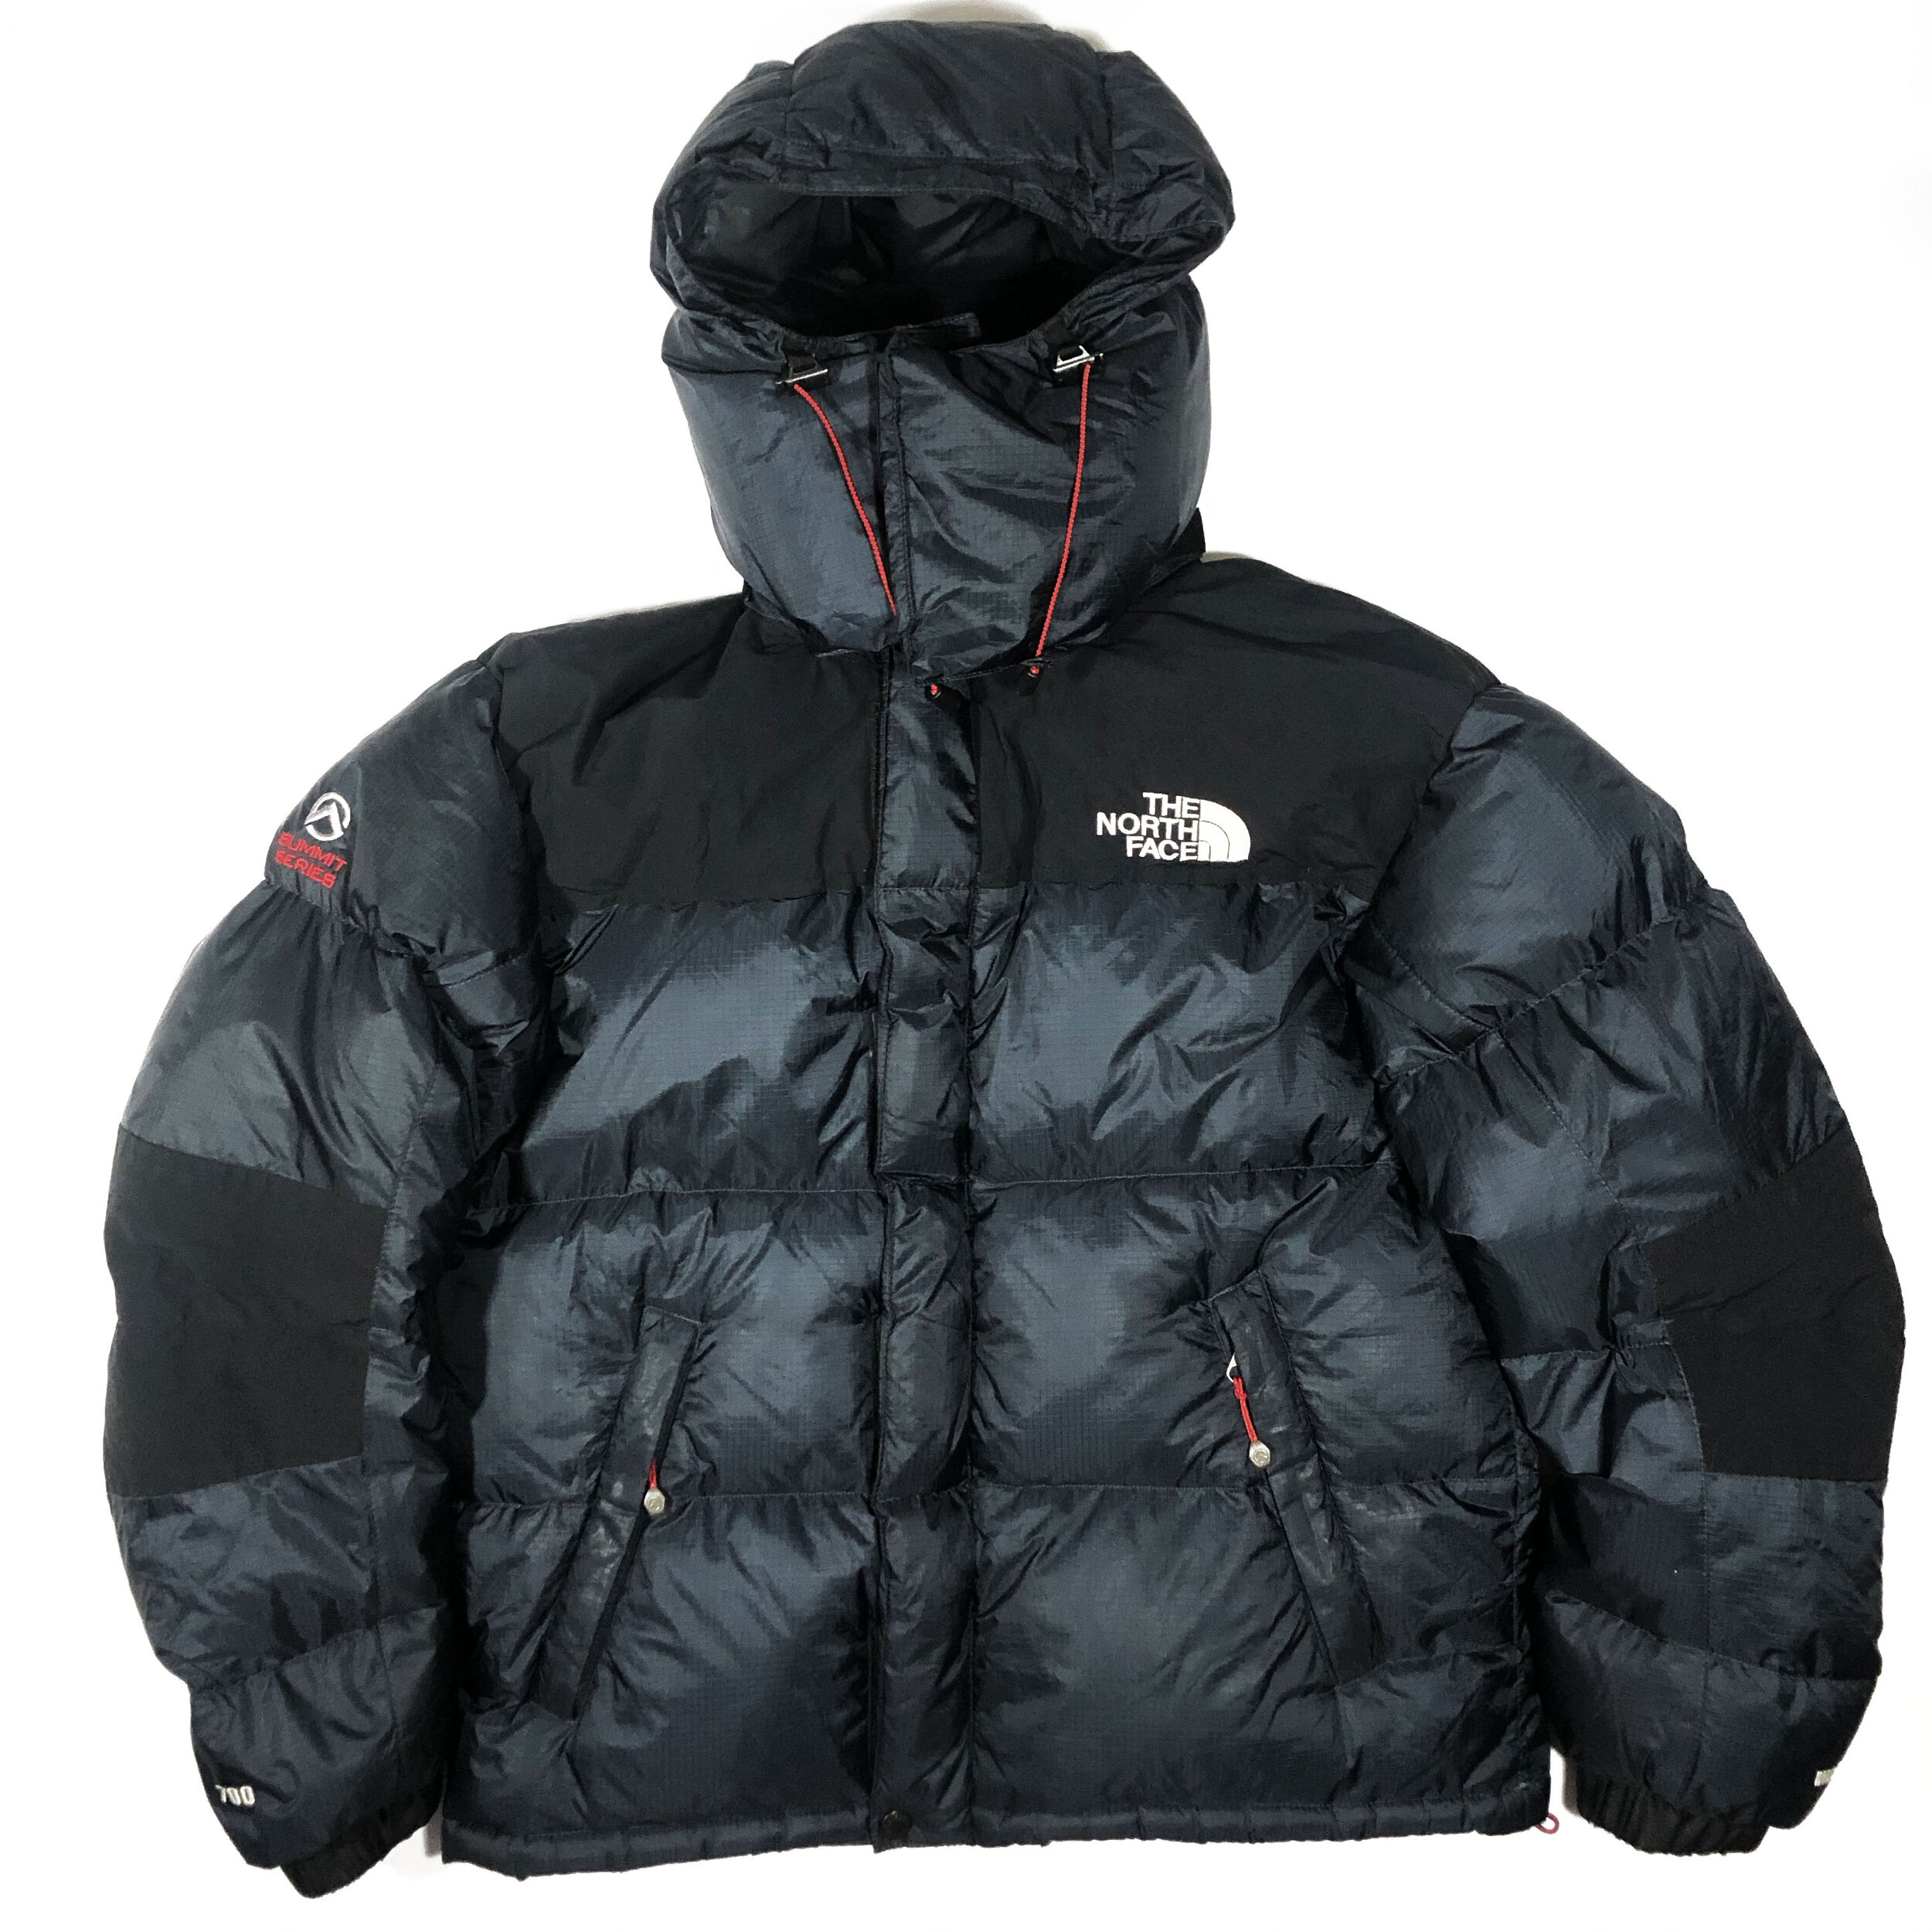 the north face 700 summit series